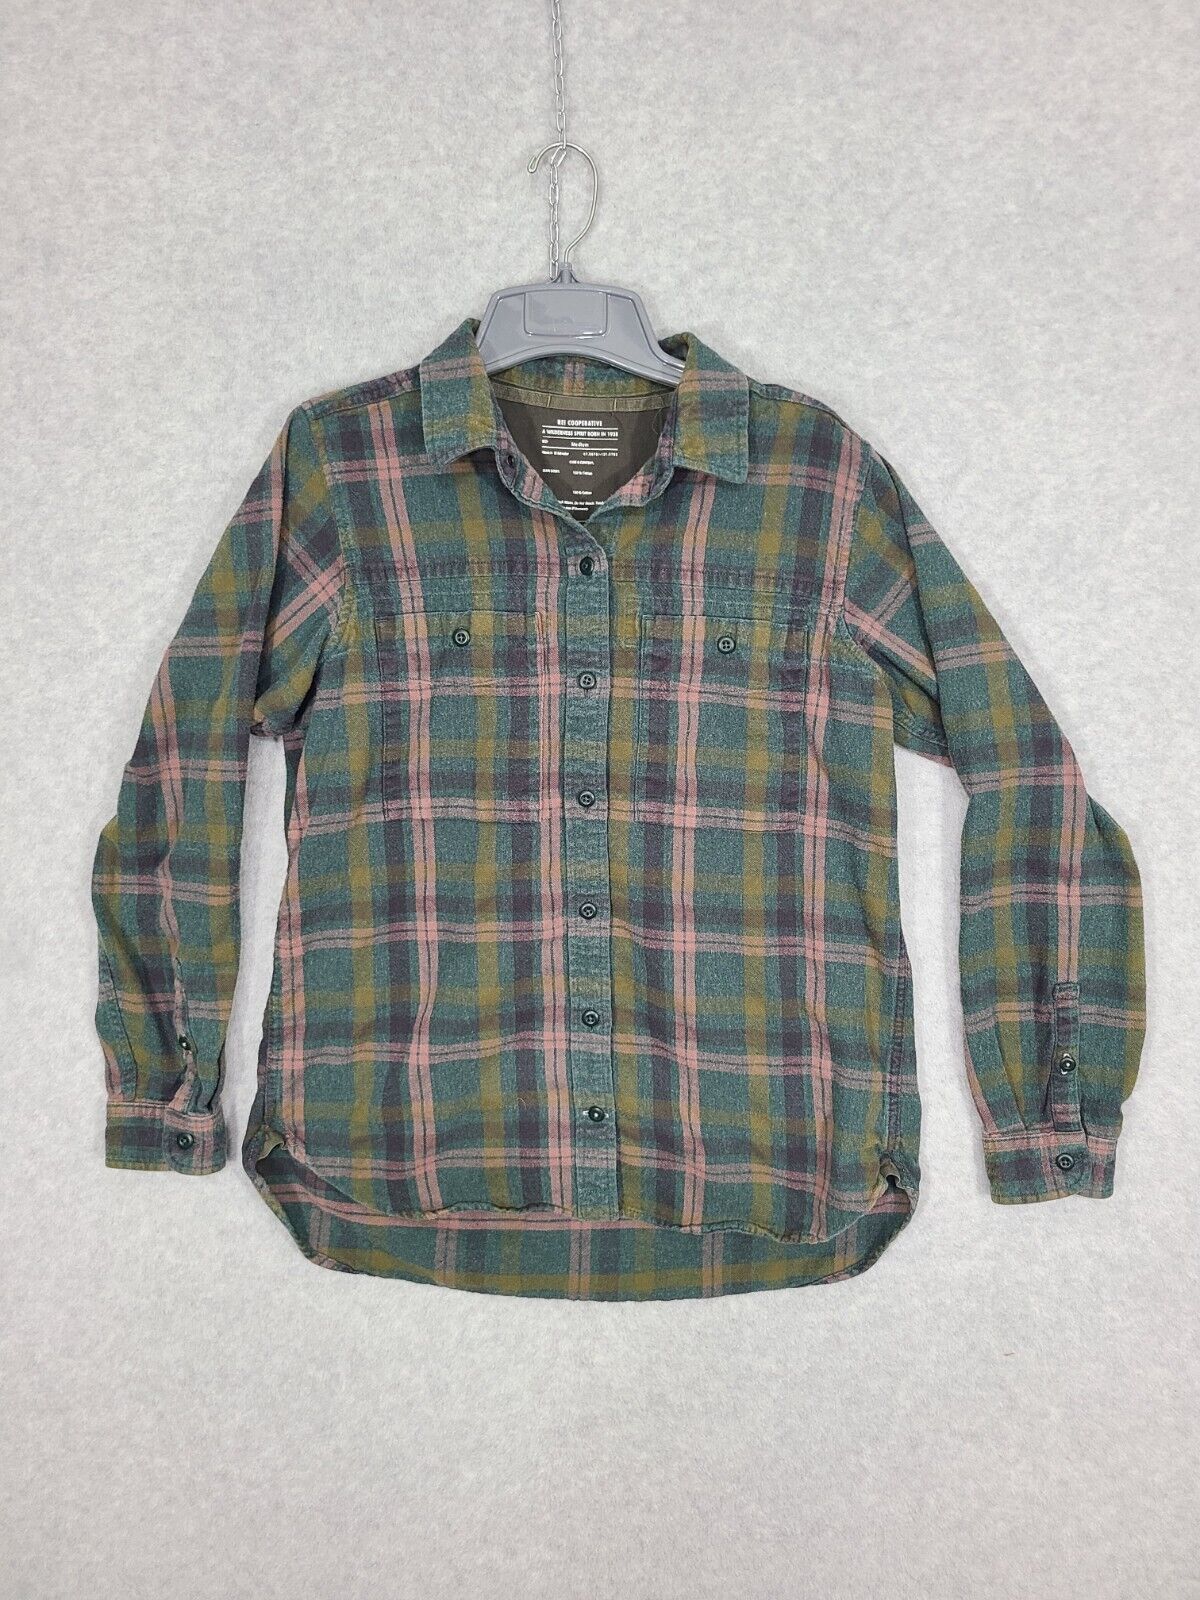 Primary image for REI Coop Women's Flannel Shirt Long Sleeve Green Plaid Medium Hiking Fishing